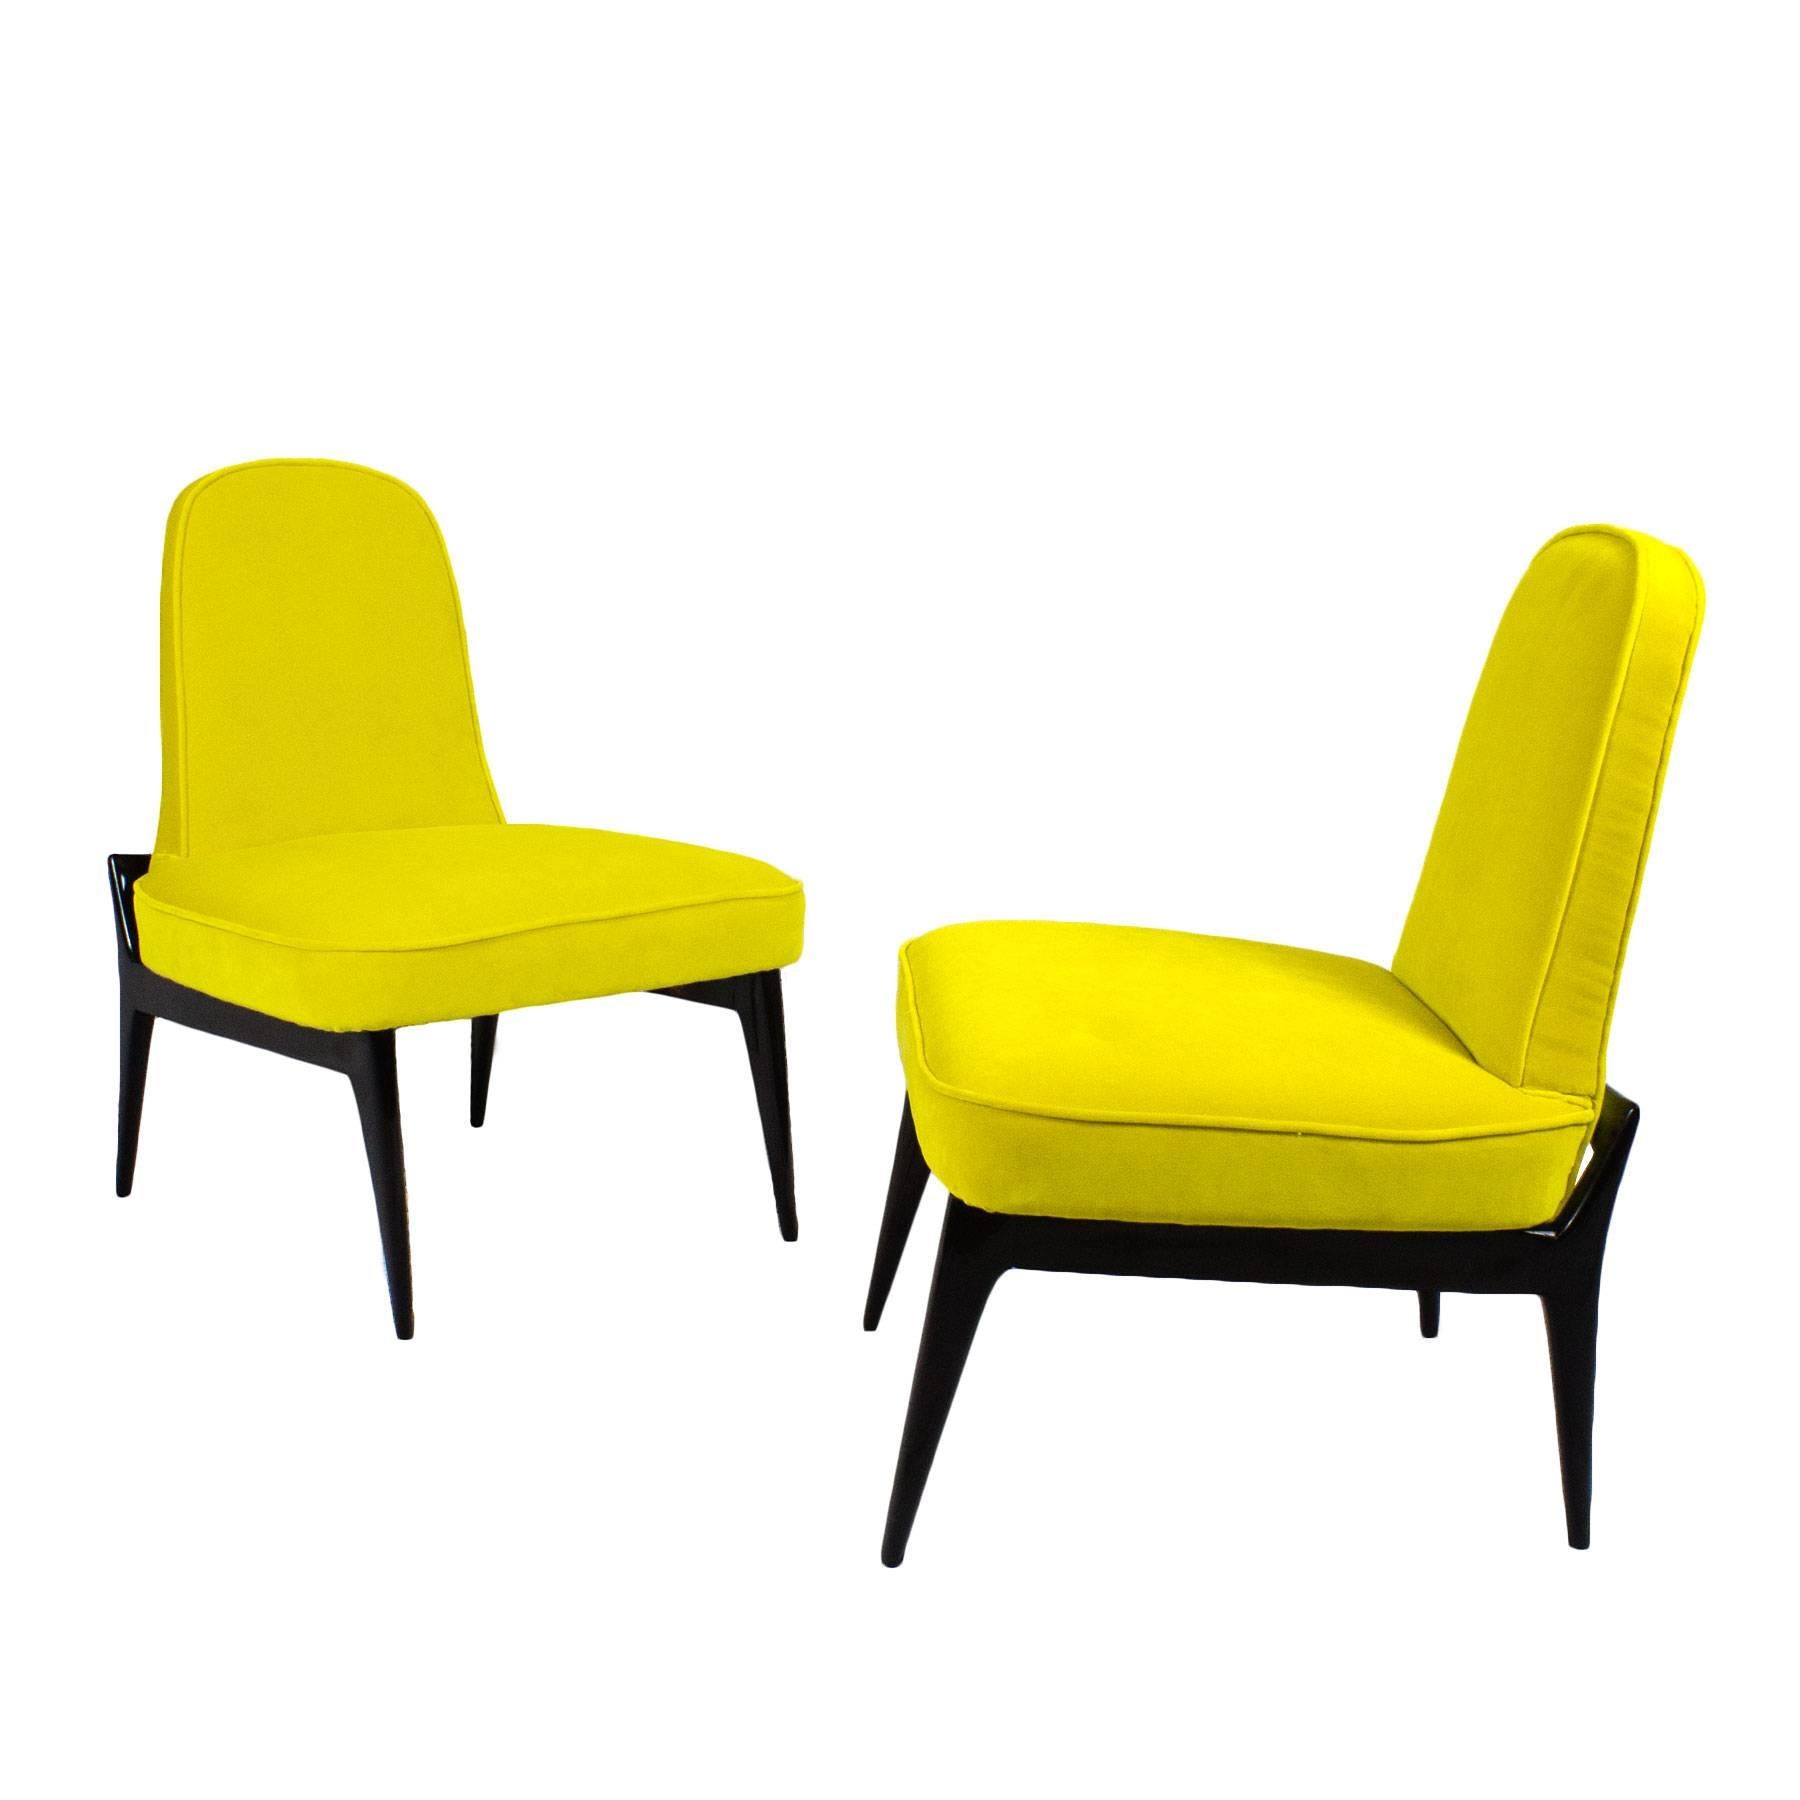 1950 Pair of Low Chairs, Yellow Velvet, Solid Mahogany Feet and Back, Italy